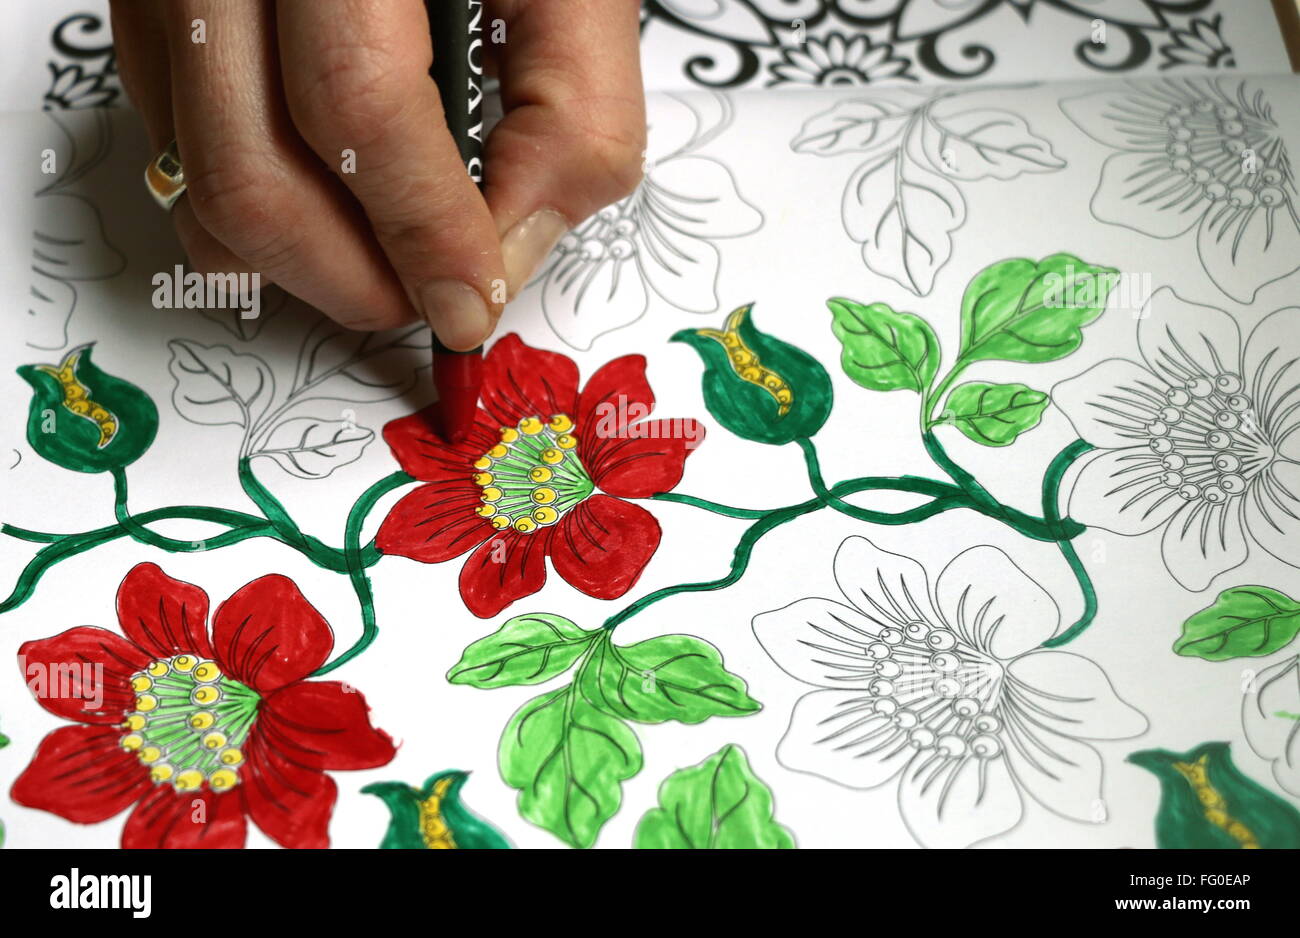 Woman's hand doing adult coloring of floral design, red and green, practicing stress management. Stock Photo